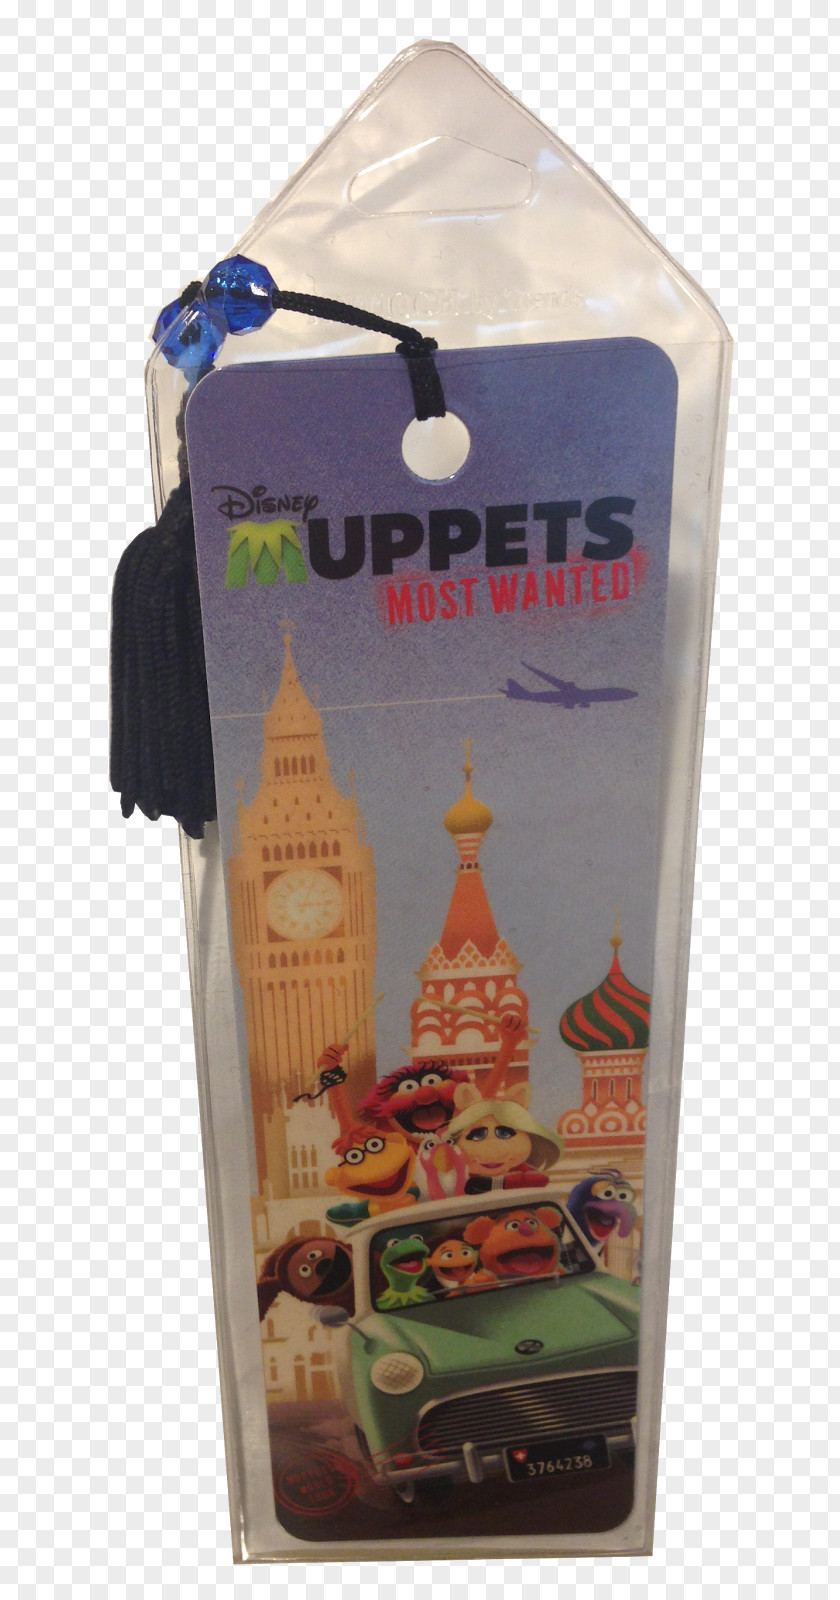 Muppets Most Wanted The Familienplaner Film Product Walt Disney Company PNG